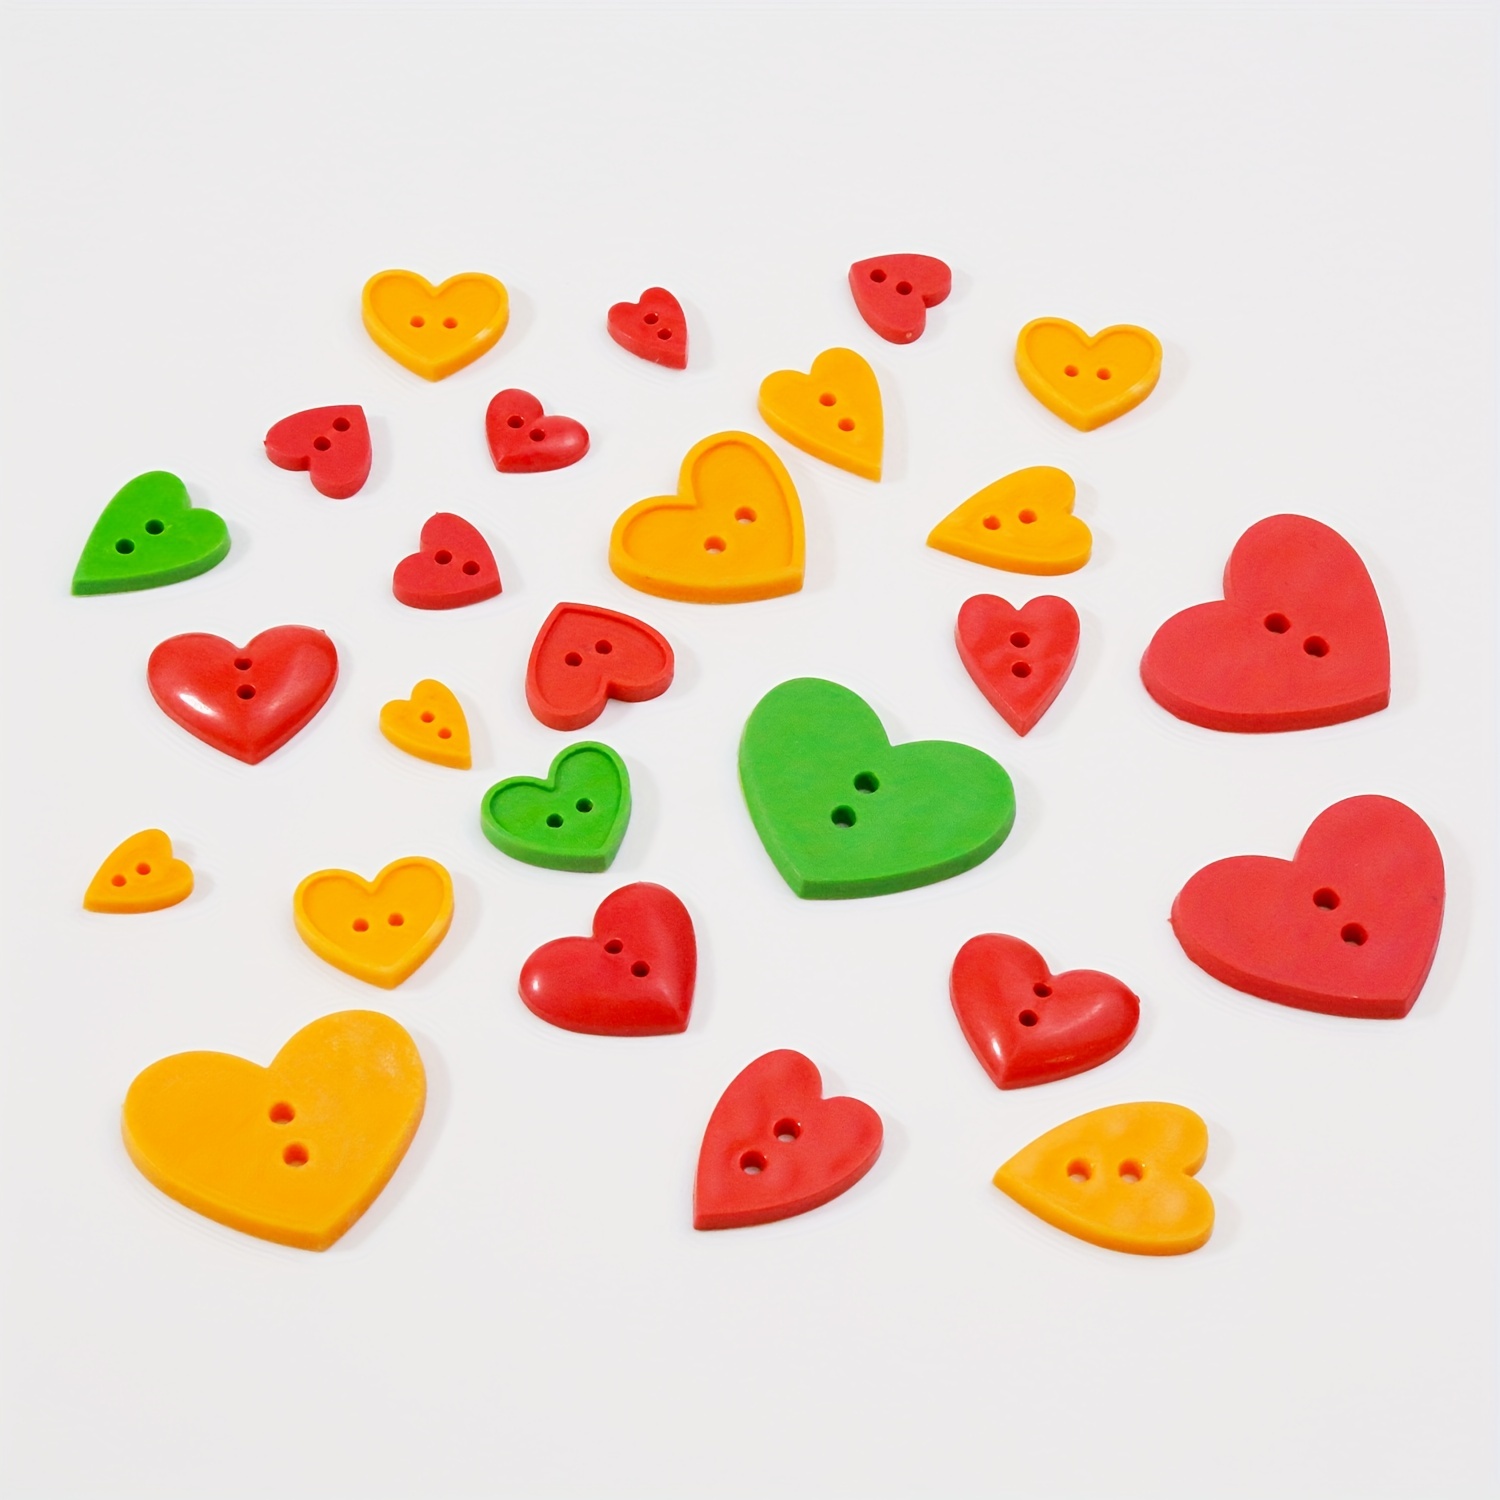 Heart Button Crafts Projects  Heart Shaped Buttons Bright - 14mm